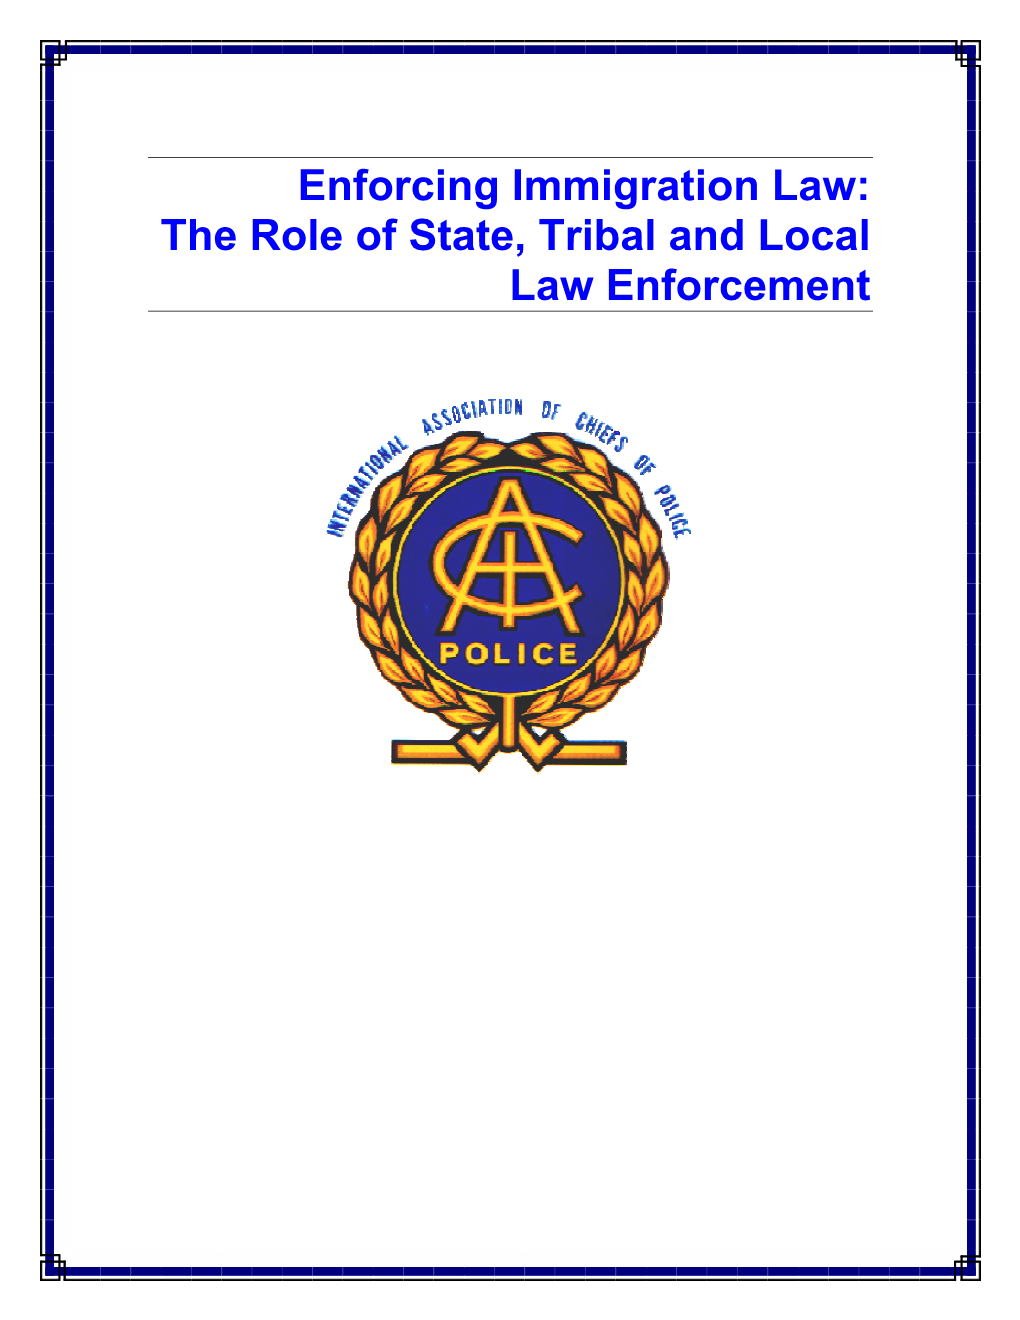 The Role of State, Tribal and Local Law Enforcement